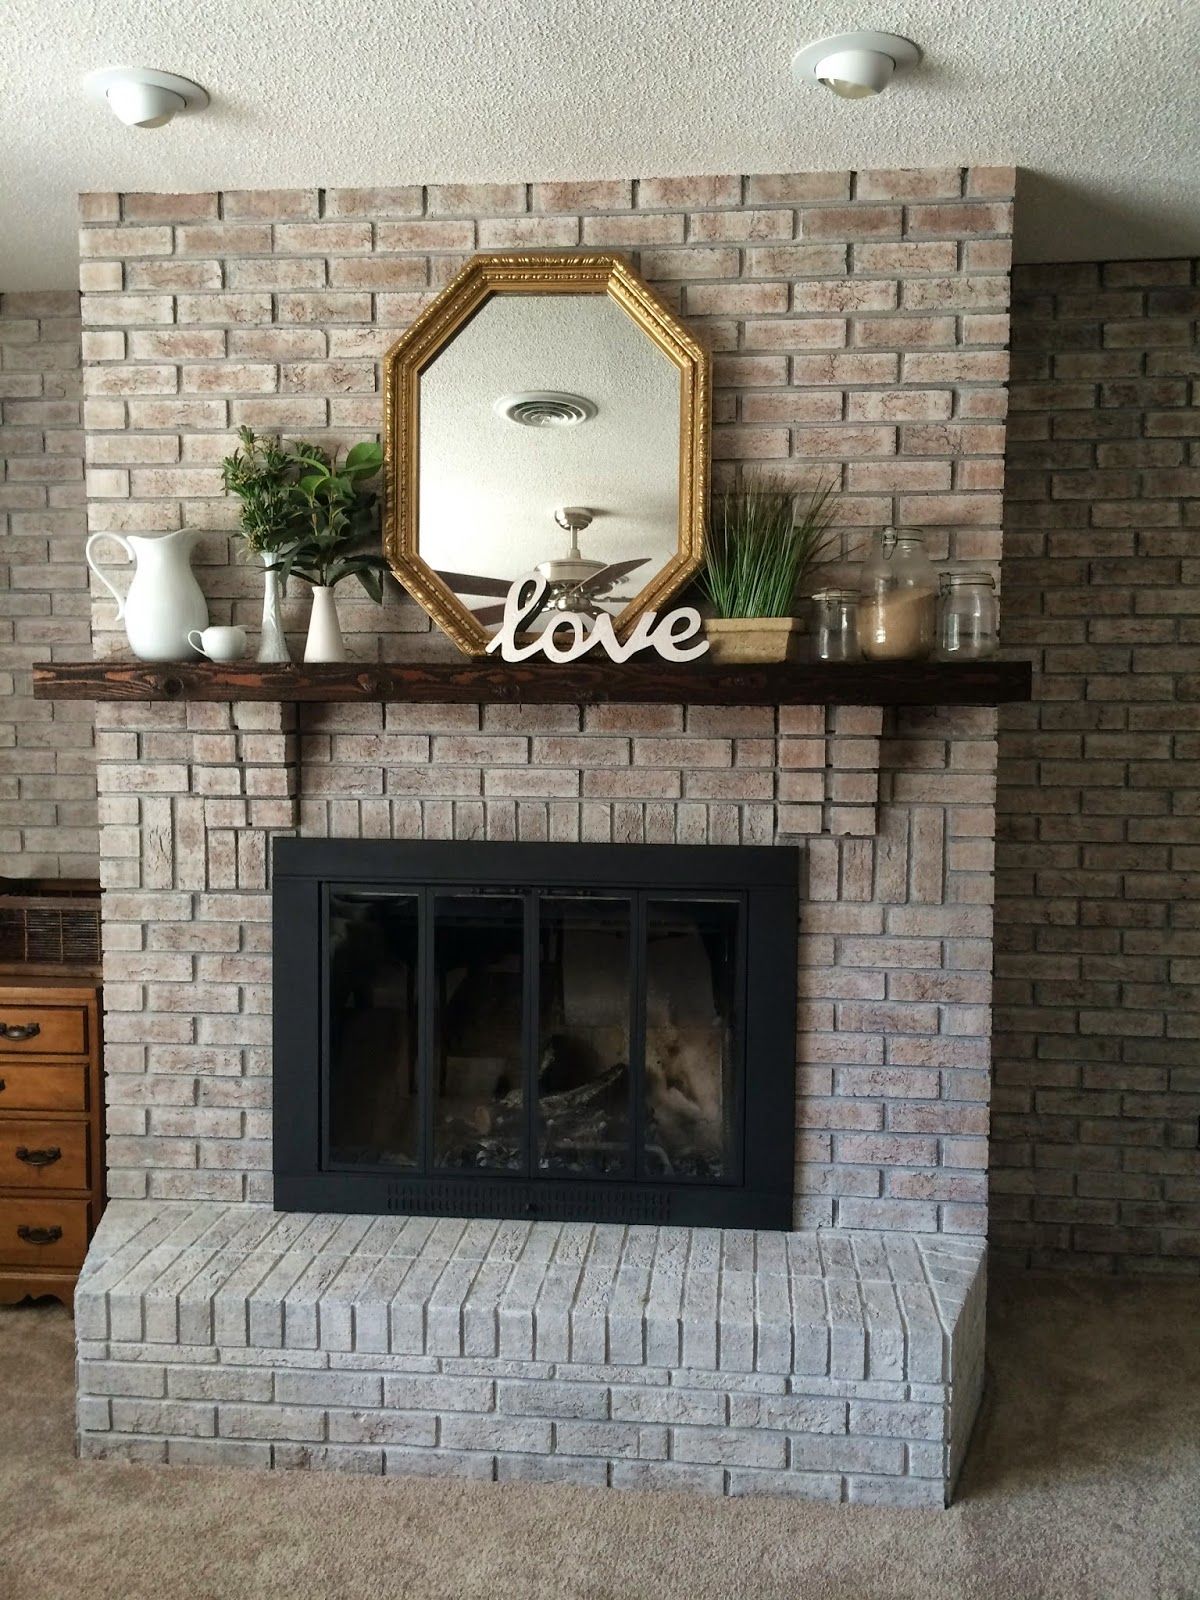 Painting Fireplace Doors Unique White Washing Brick with Gray Beige Walking with Dancers